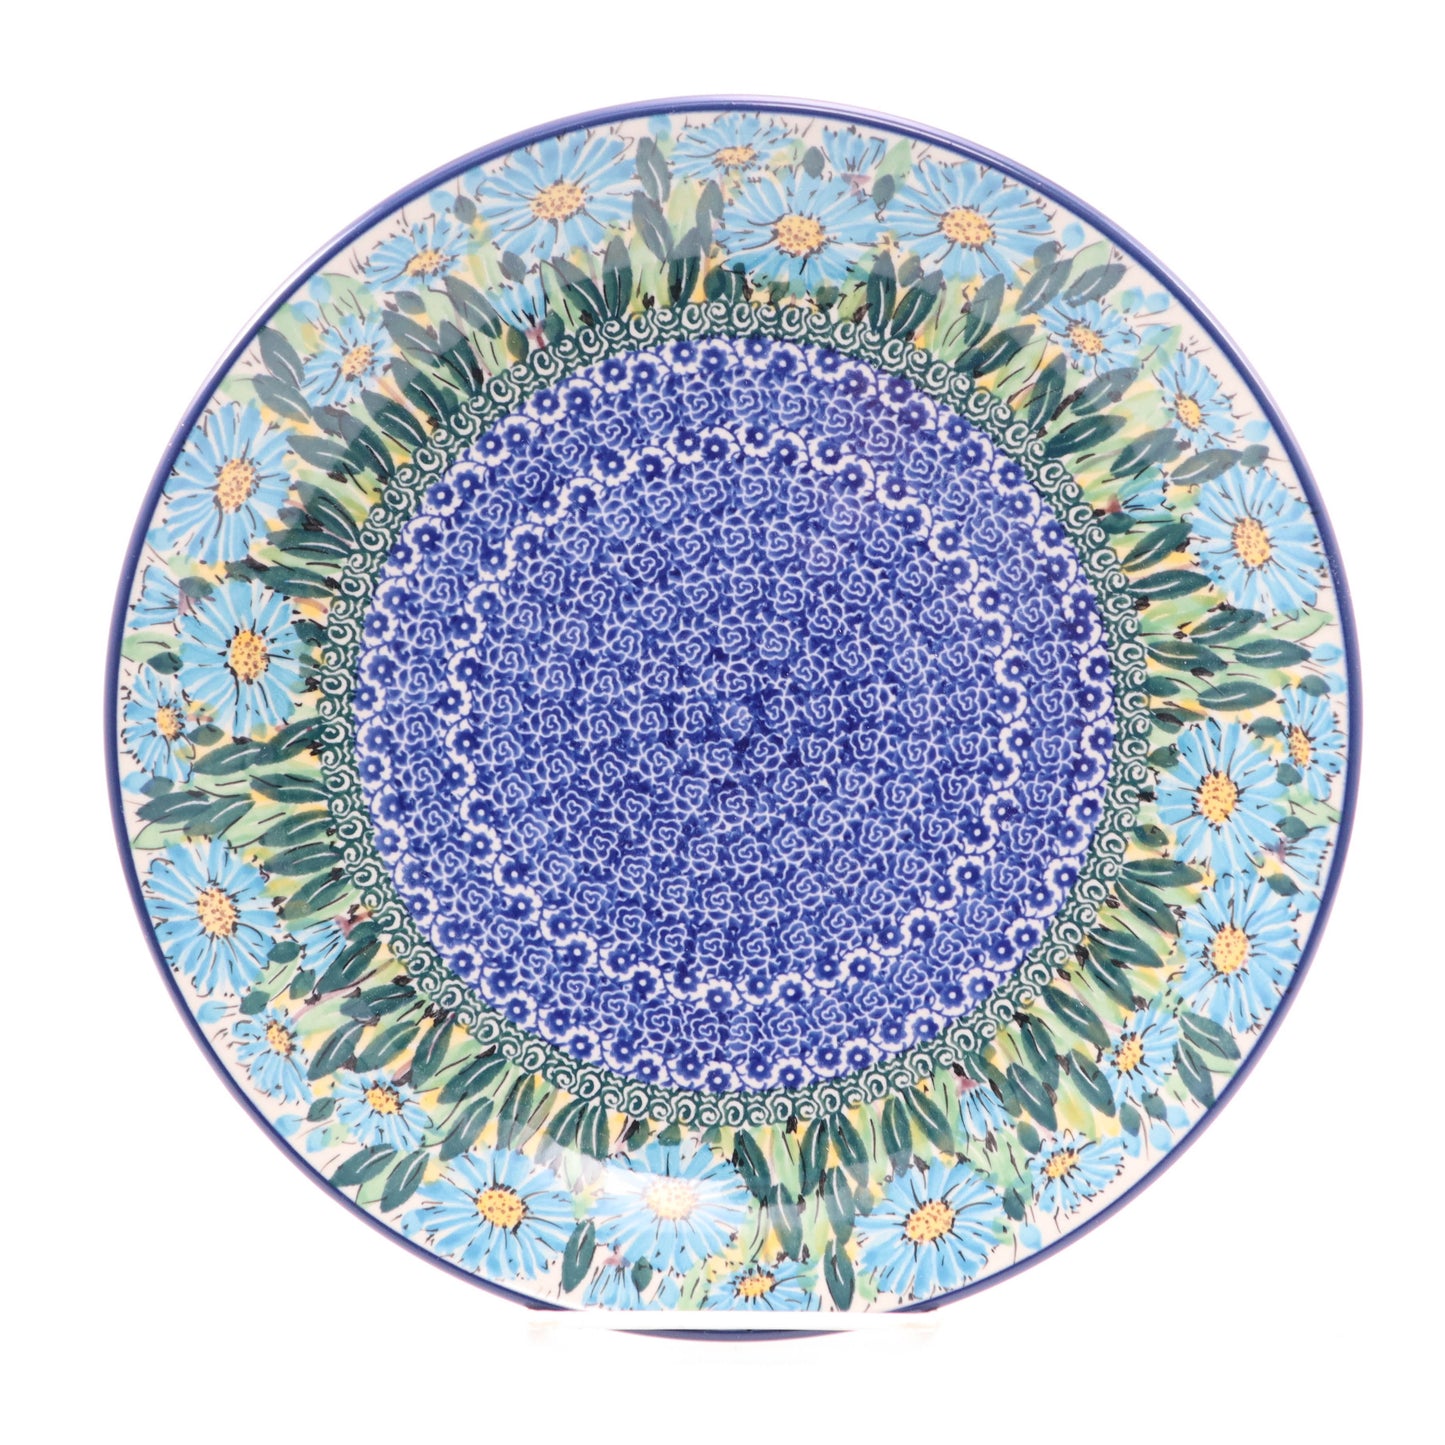 10.5" Round Plate.  Pattern: Blue Aster